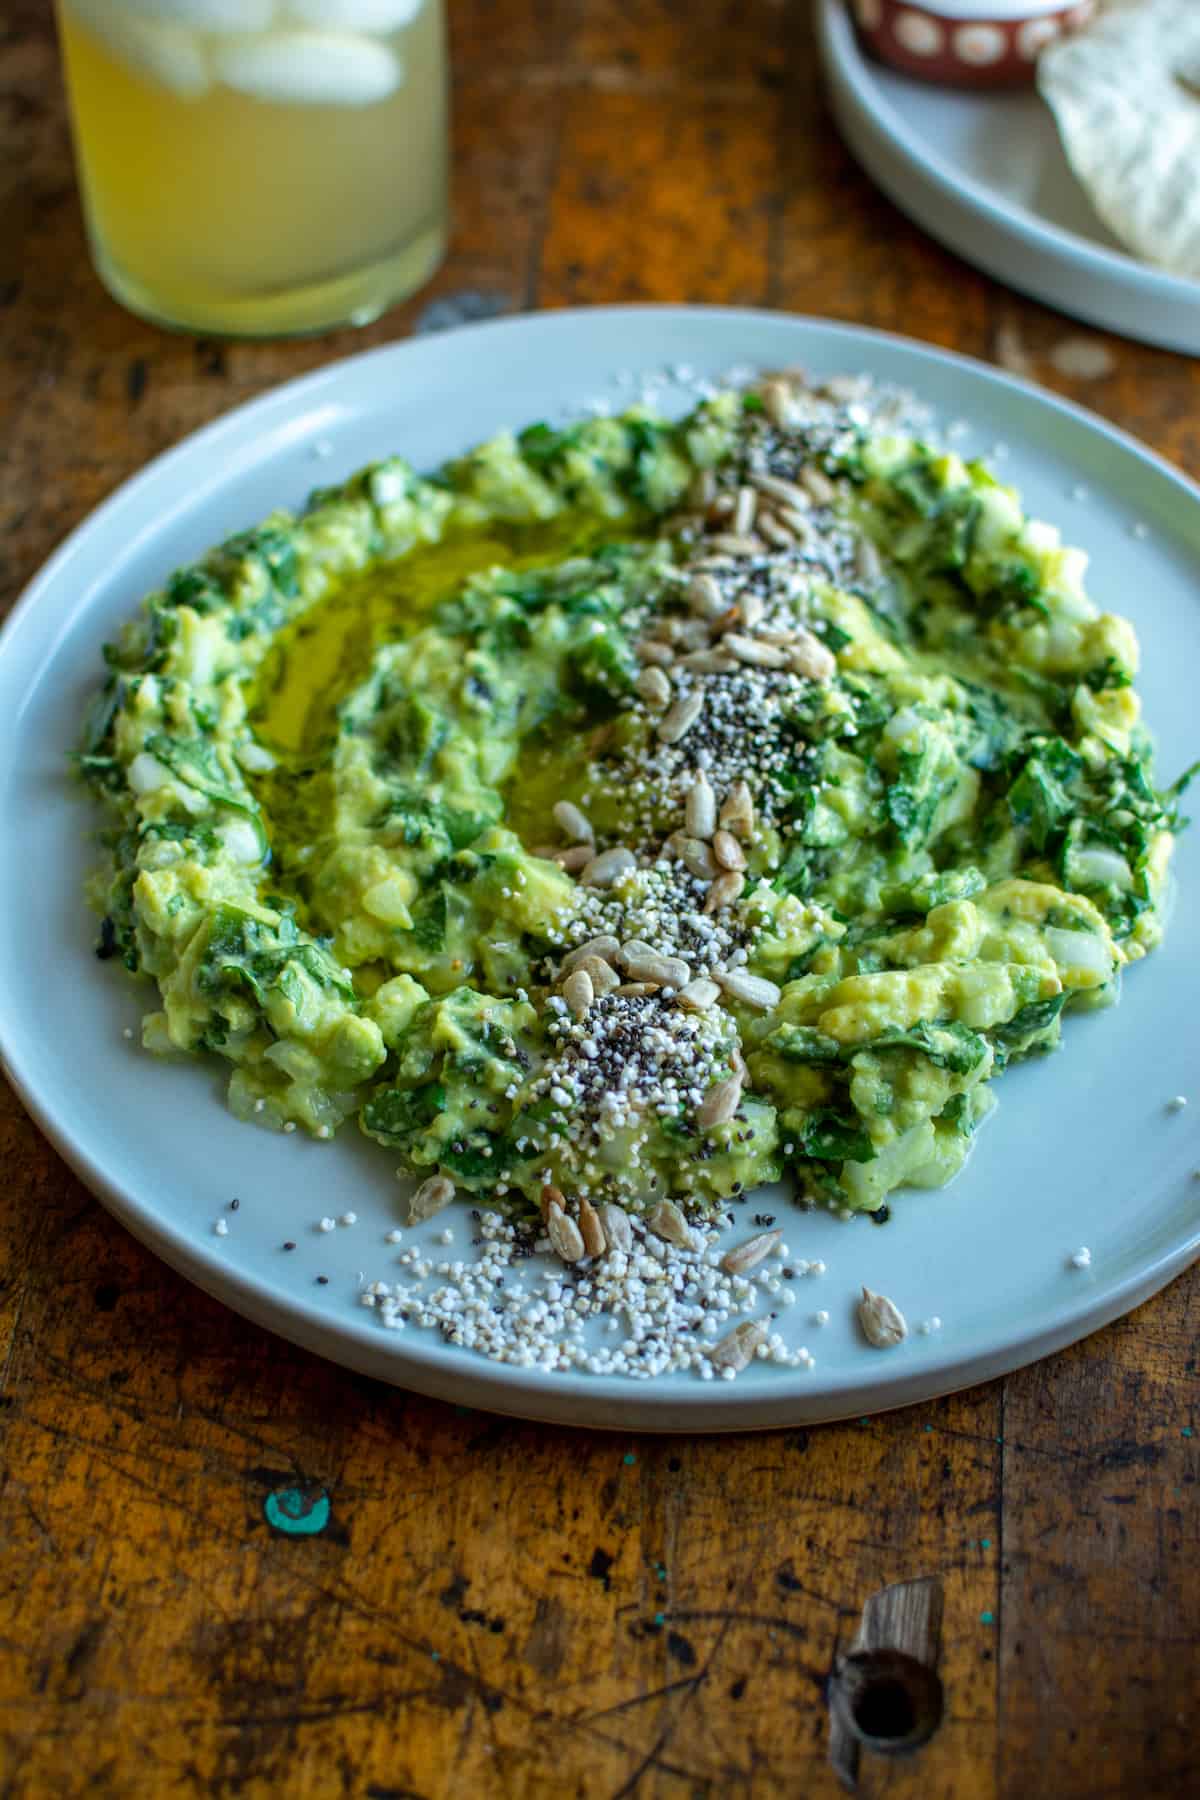 Homemade guacamole with a twist! This Charred Poblano Guacamole has all the creamy avocado goodness you love plus charry bits of poblano pepper and jalapeños that takes it to a whole new level of delicious. Vegan and gluten-free! #guacamole #ad #avocados #cagrown #caavocados